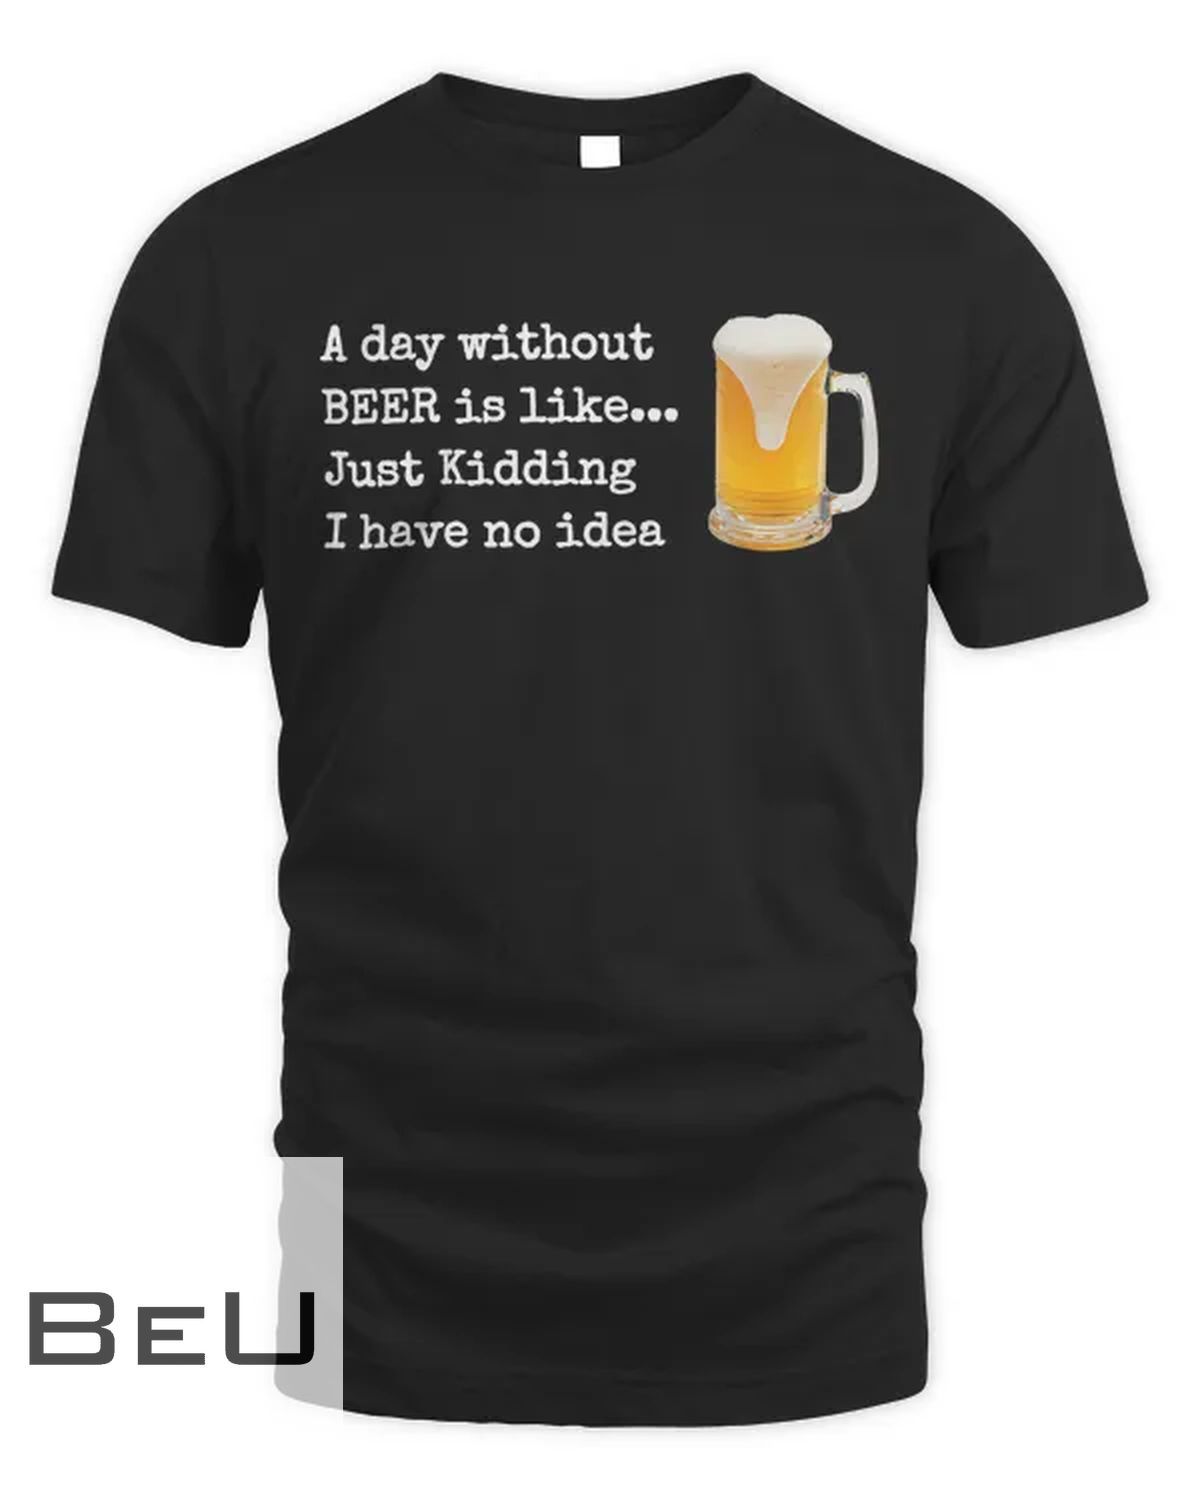 A Day Without Beer Is Like...just Kidding I Have No Idea! T-shirt